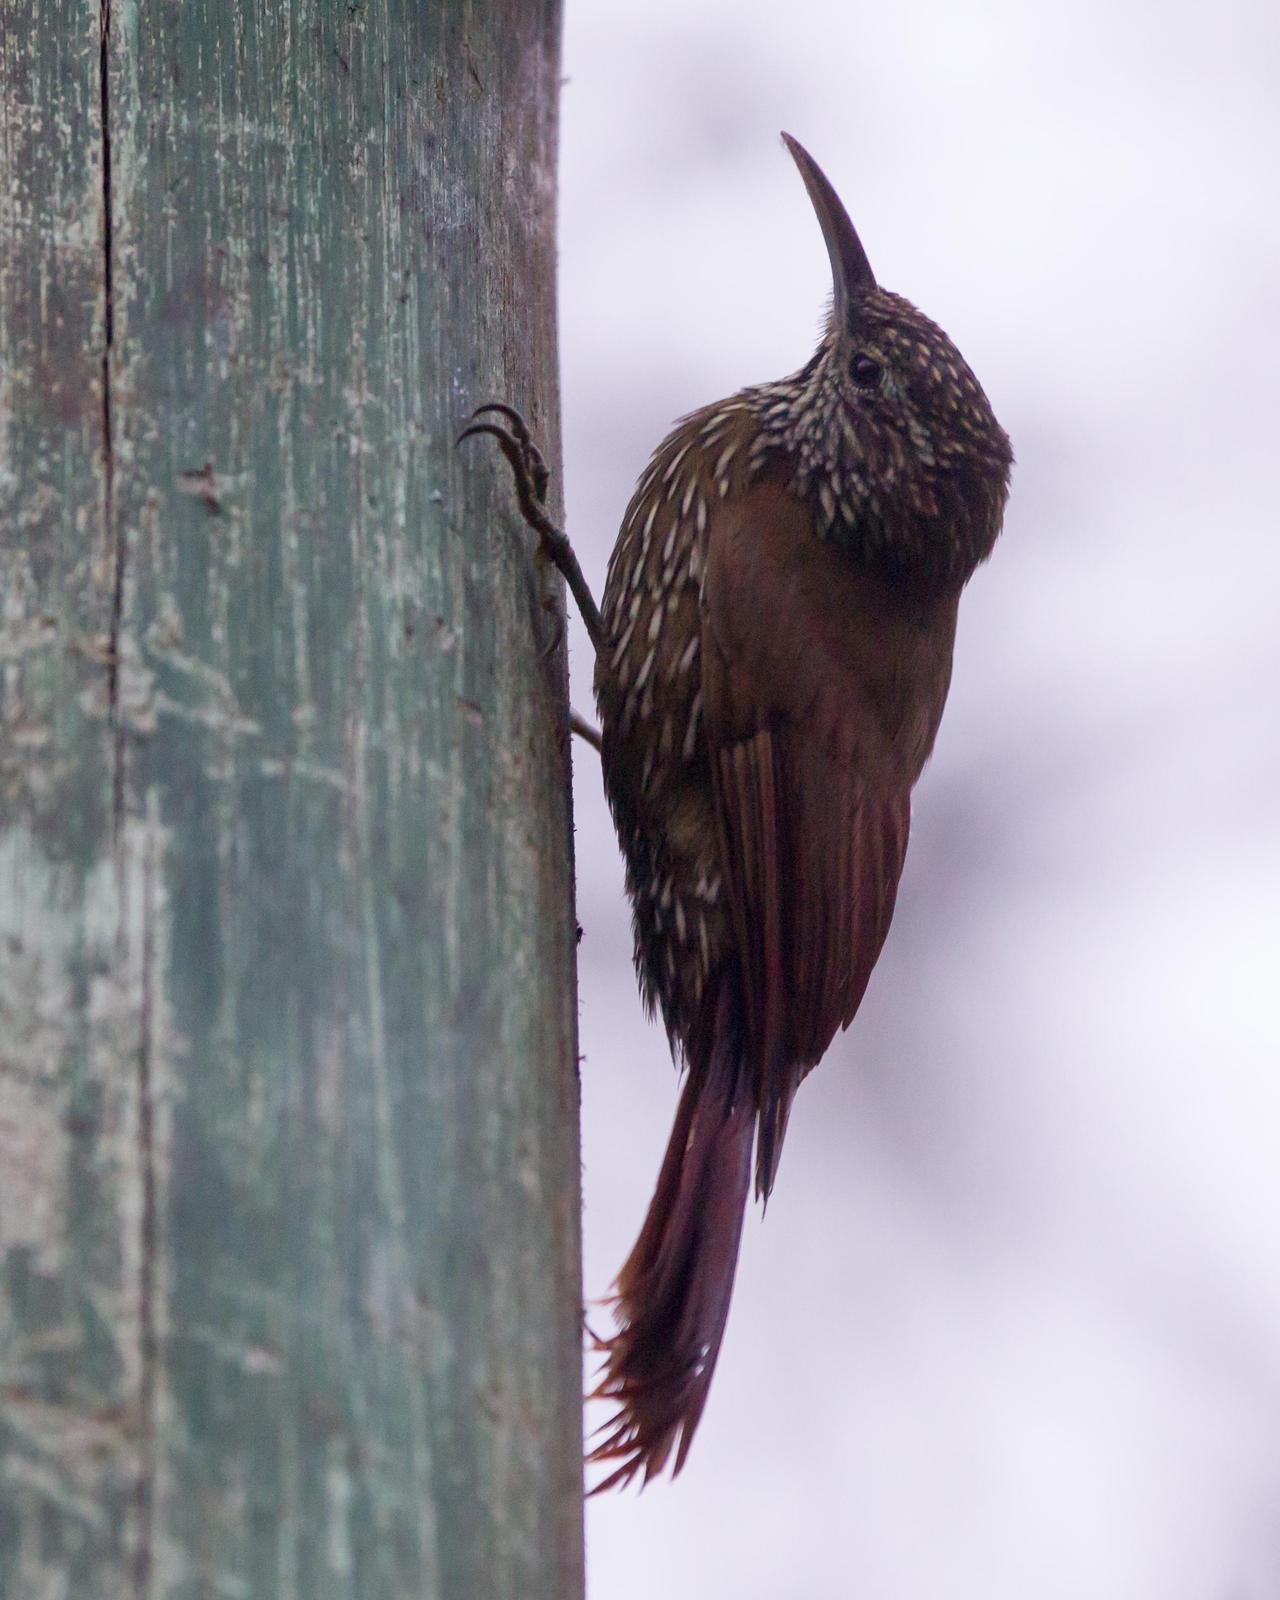 Montane Woodcreeper Photo by Kevin Berkoff